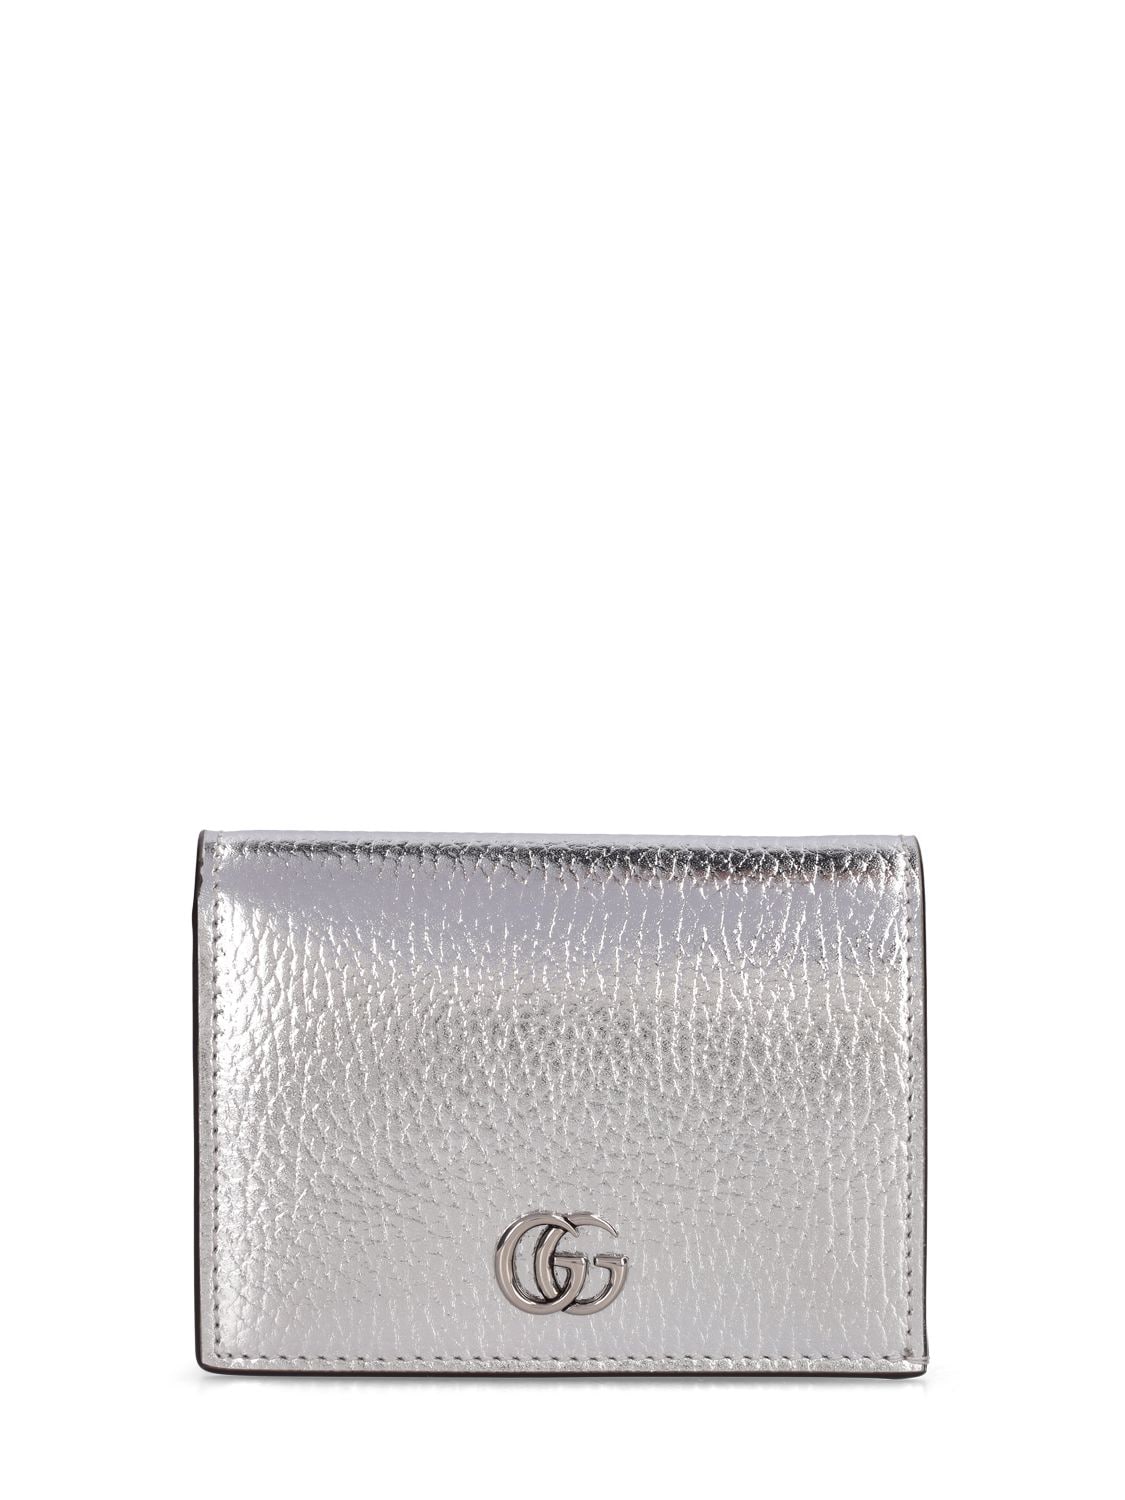 Gucci GG Marmont Leather Wallet